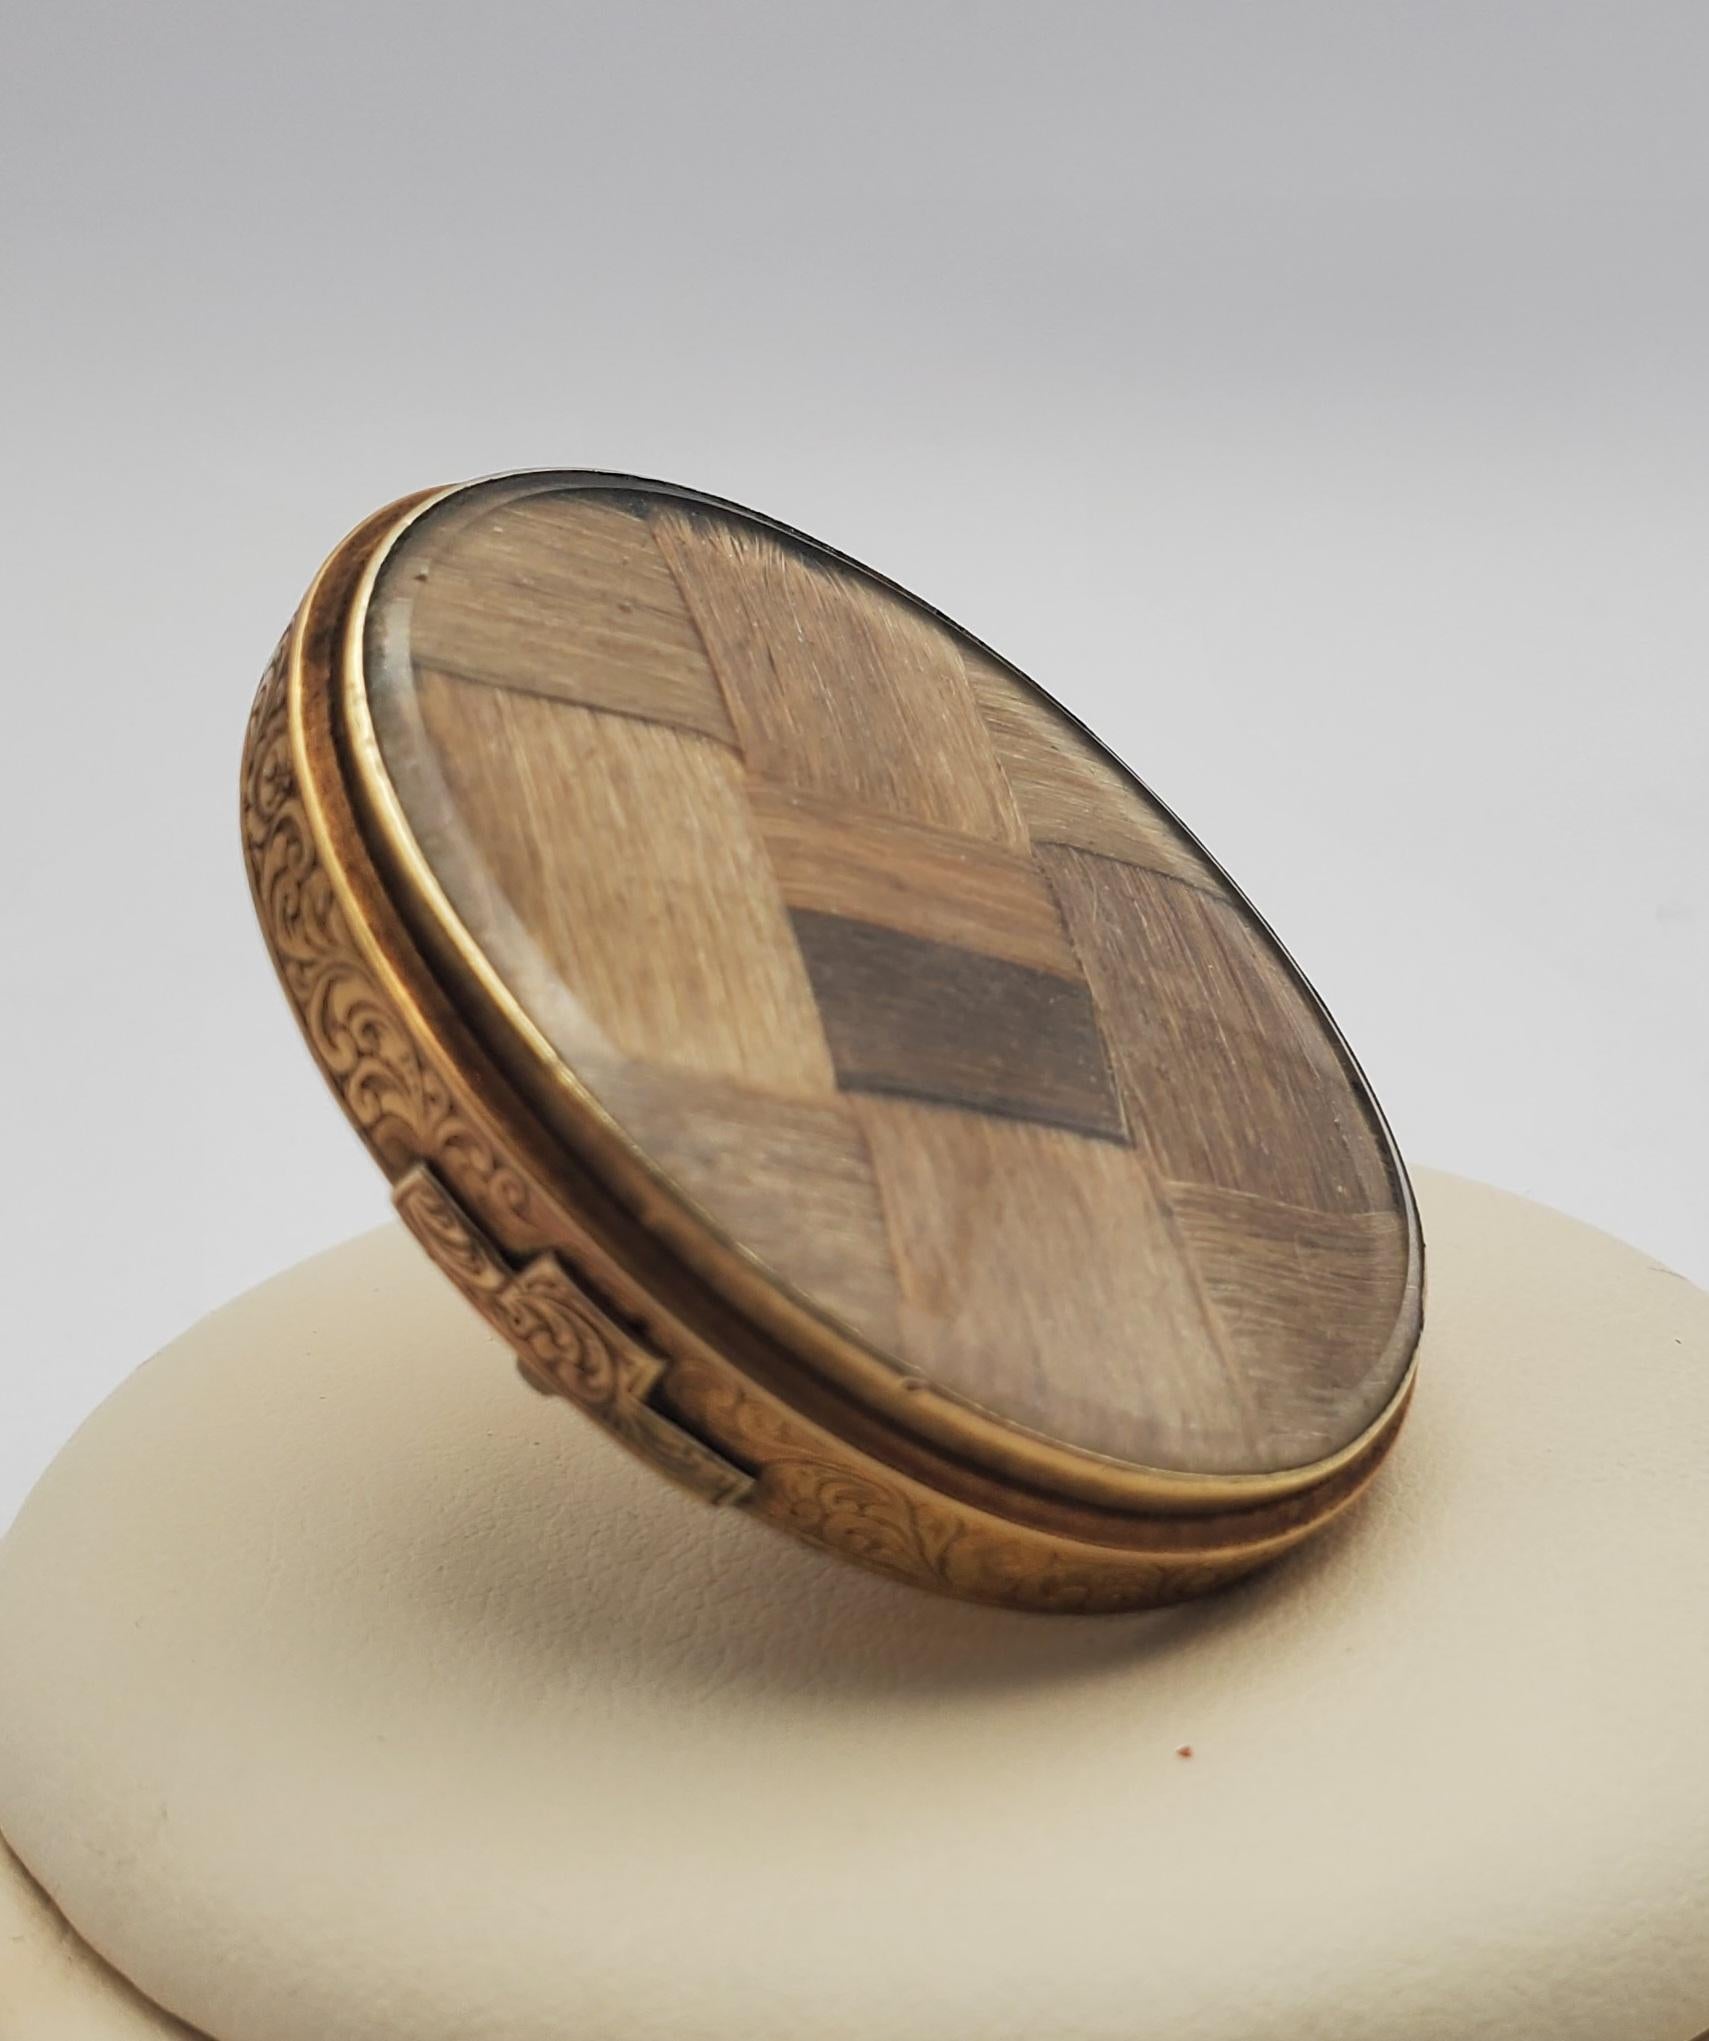 Beautiful and large example of unique Victorian hair art In a mourning brooch. The pin features dark blond/light brown hair in a basketweave design behind a glass protective plate. The back side of the brooch features a smaller window showcasing an